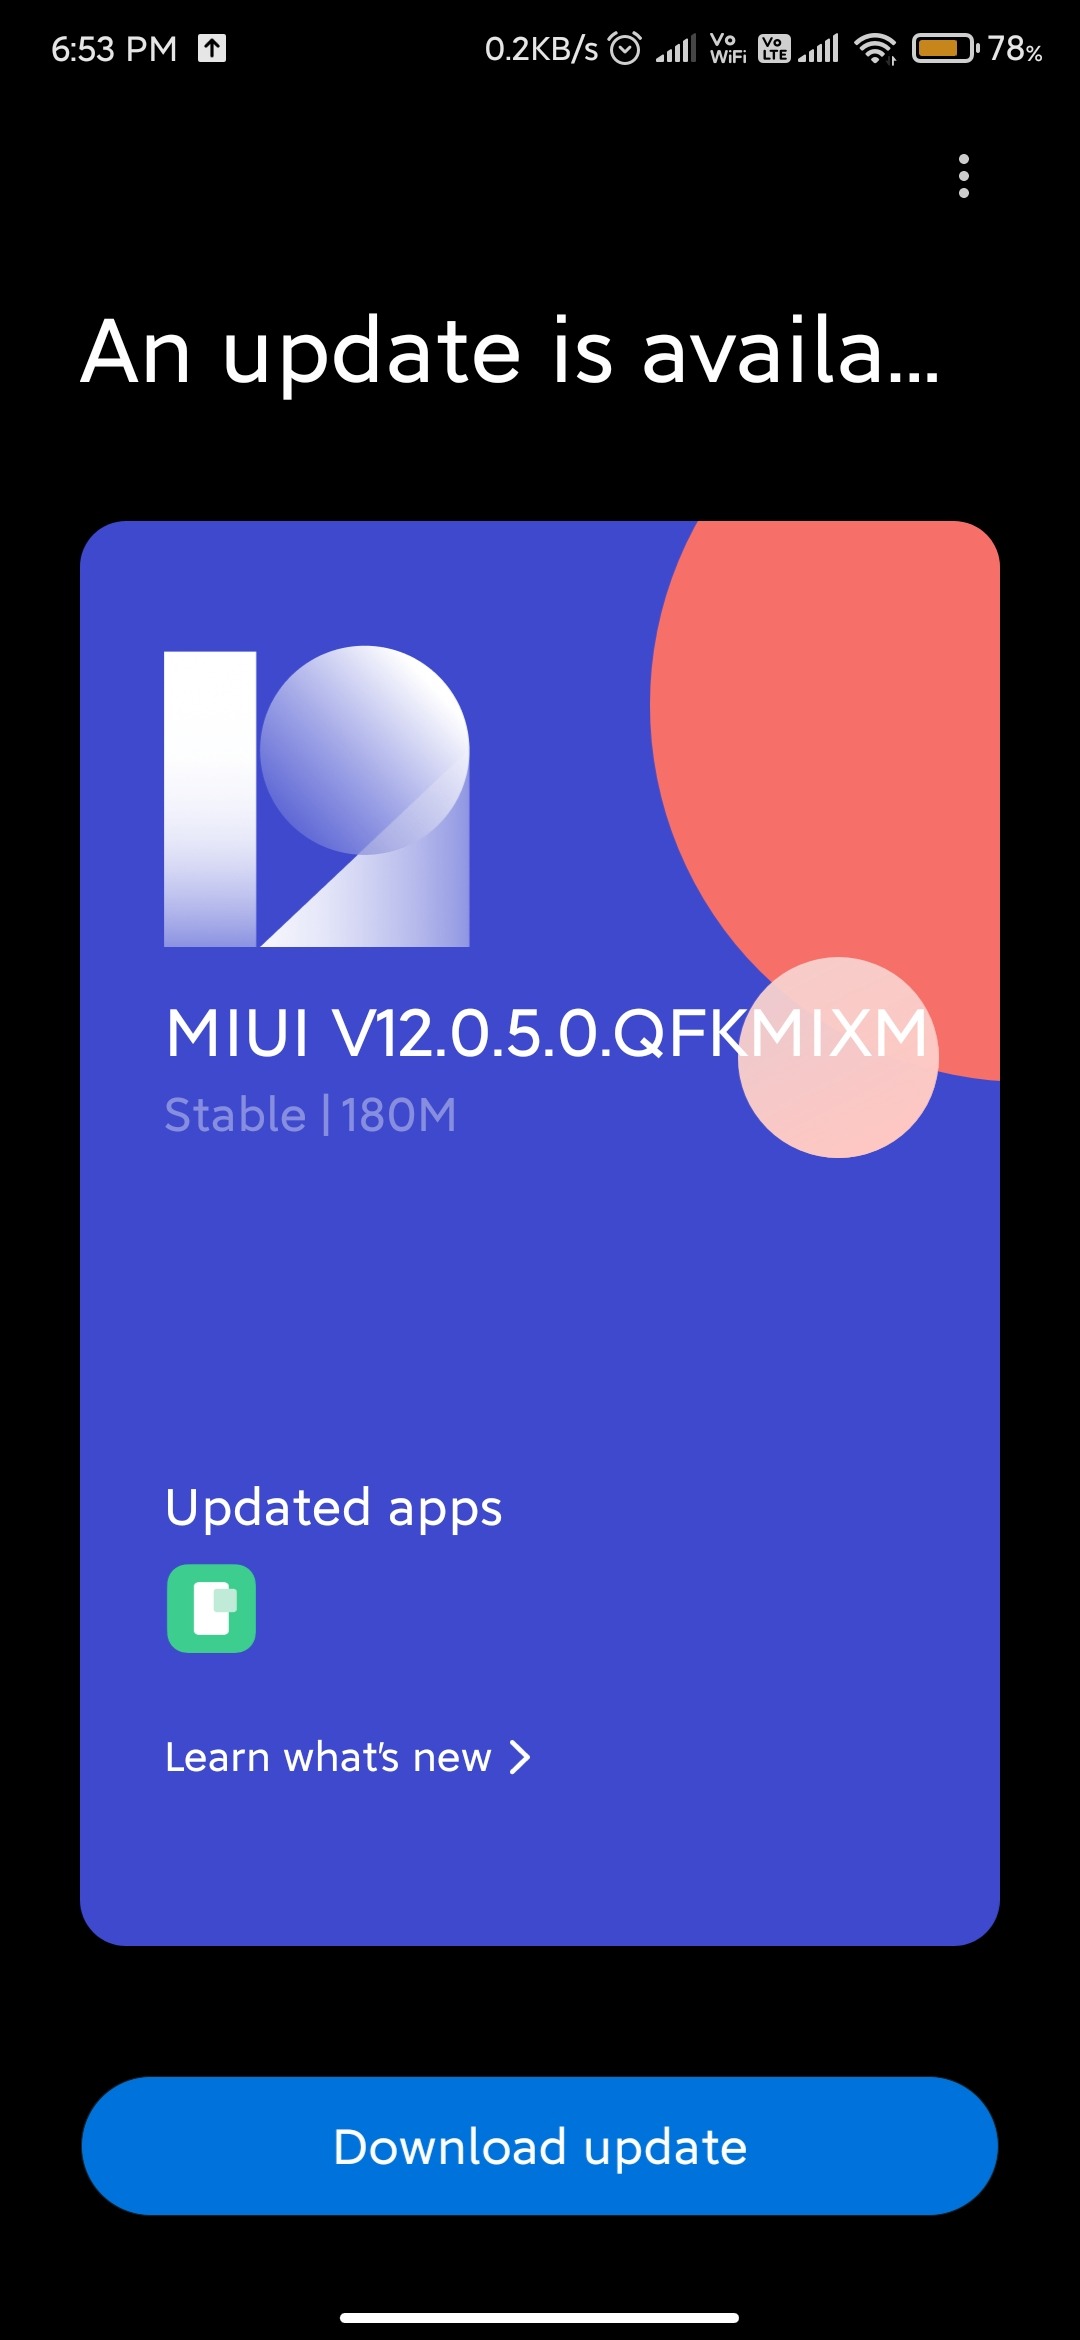 New update for the Mi 9T pro and mi 9